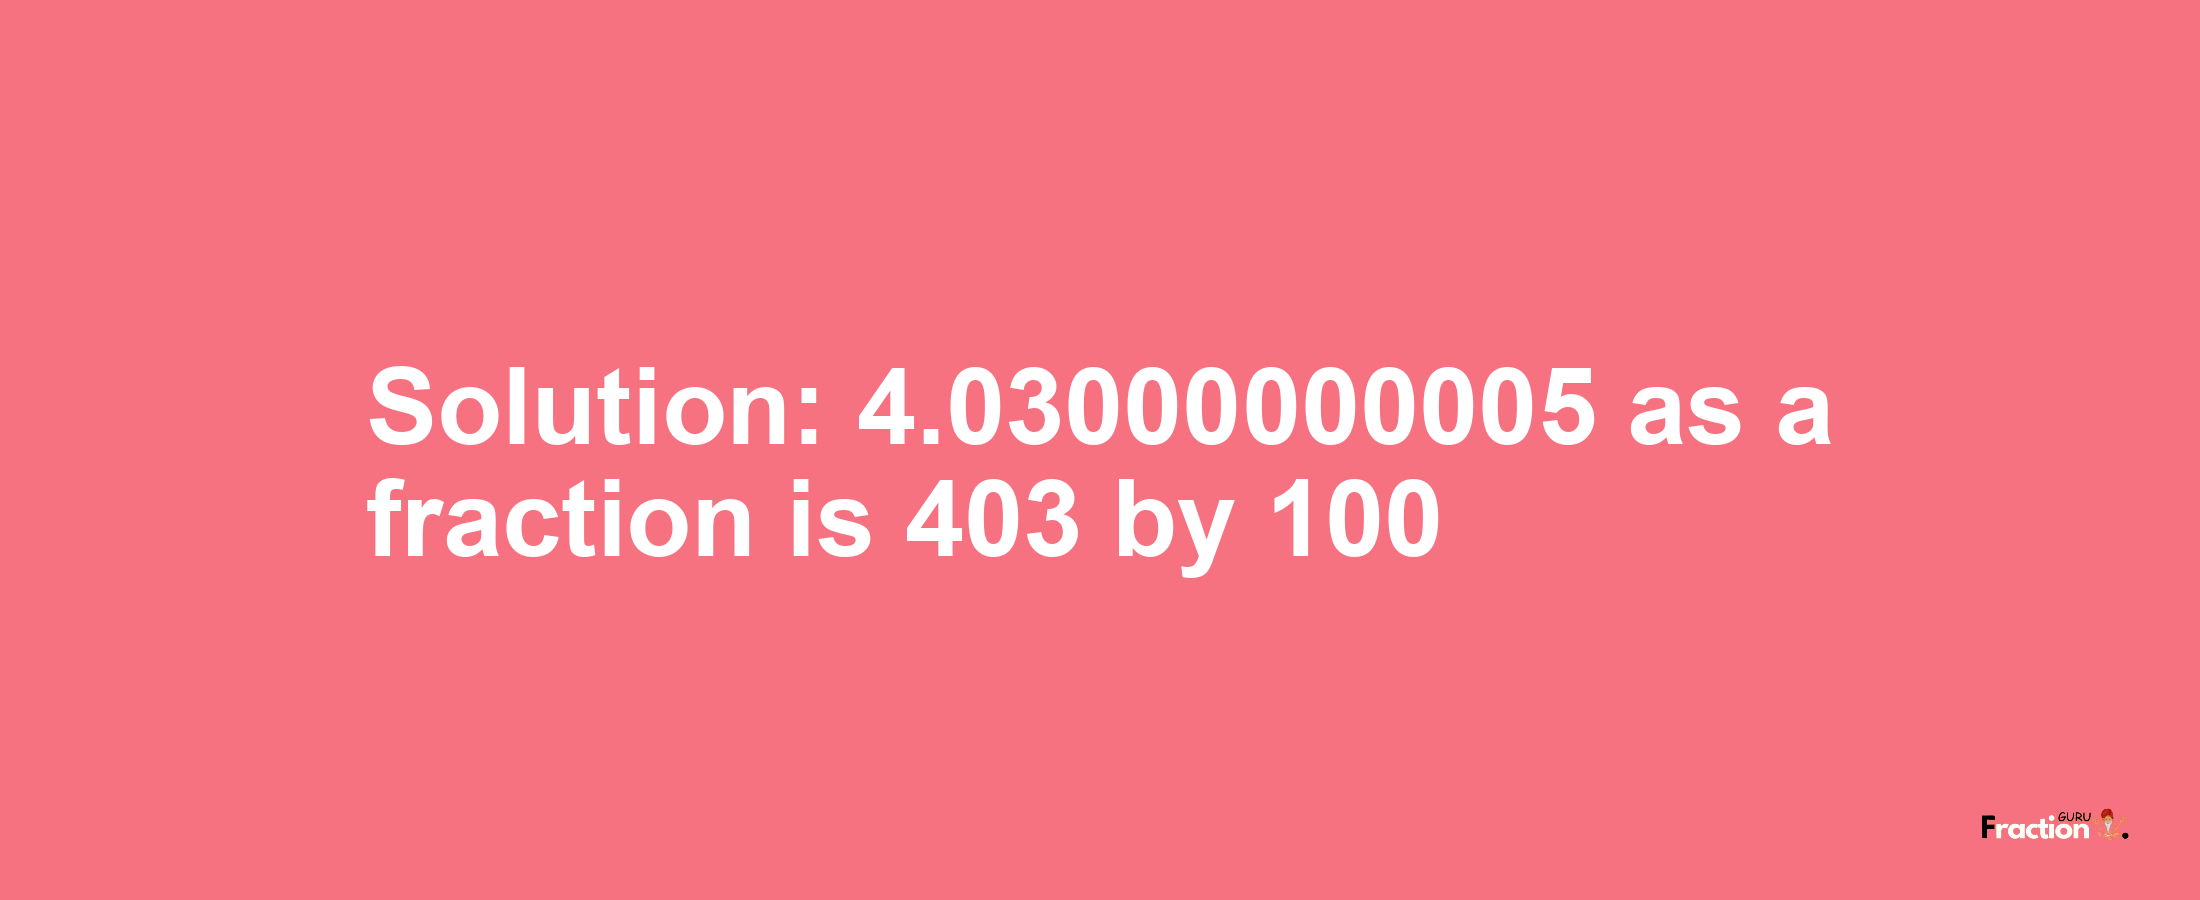 Solution:4.03000000005 as a fraction is 403/100